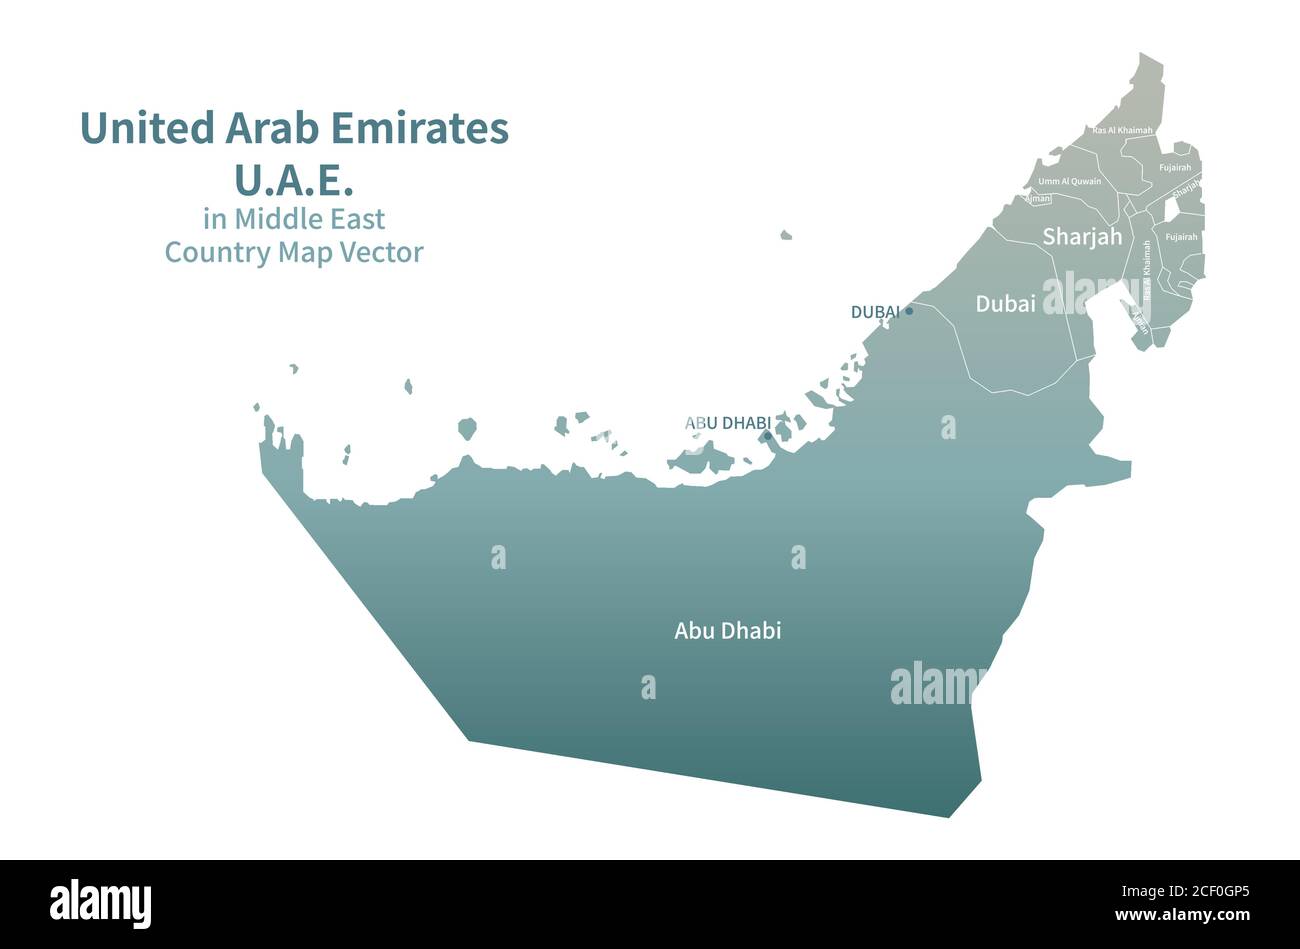 United Arab Emirates vector map. Middle East Country Map Green Series. Stock Vector